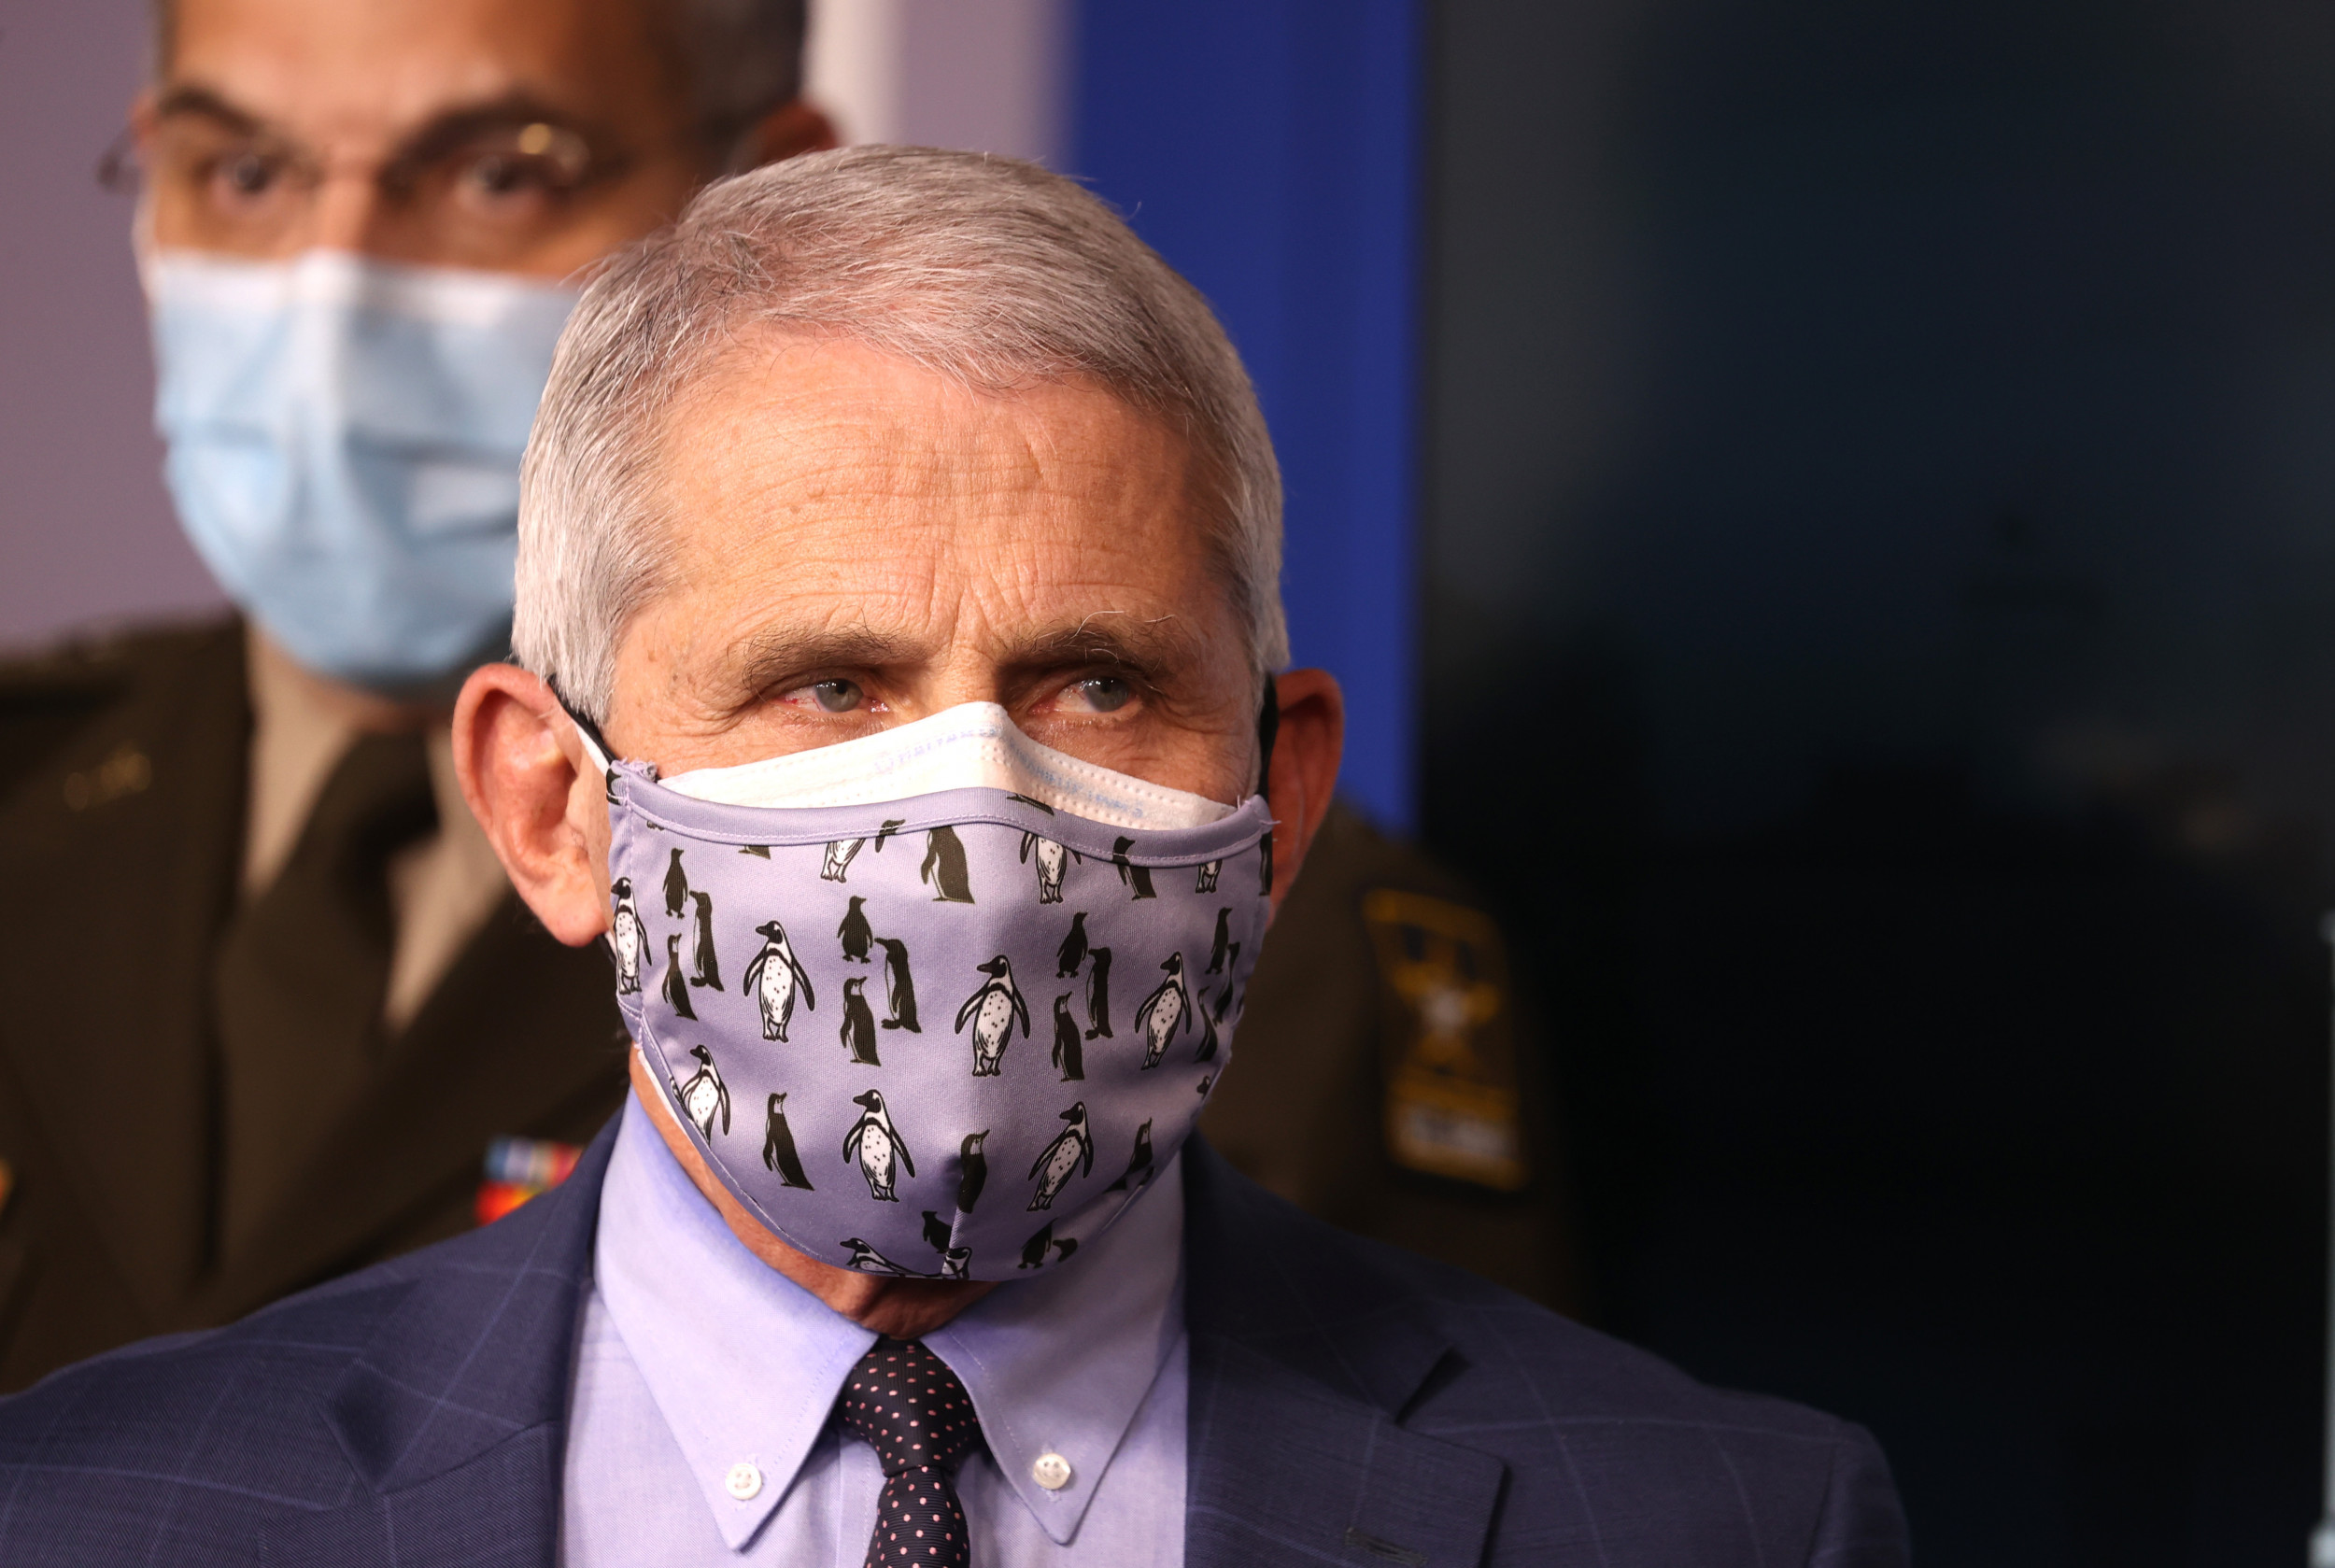 Dr. Anthony Fauci Says Double-Masking Likely 'More Effective,' U.K. COVID Strain in 20 States